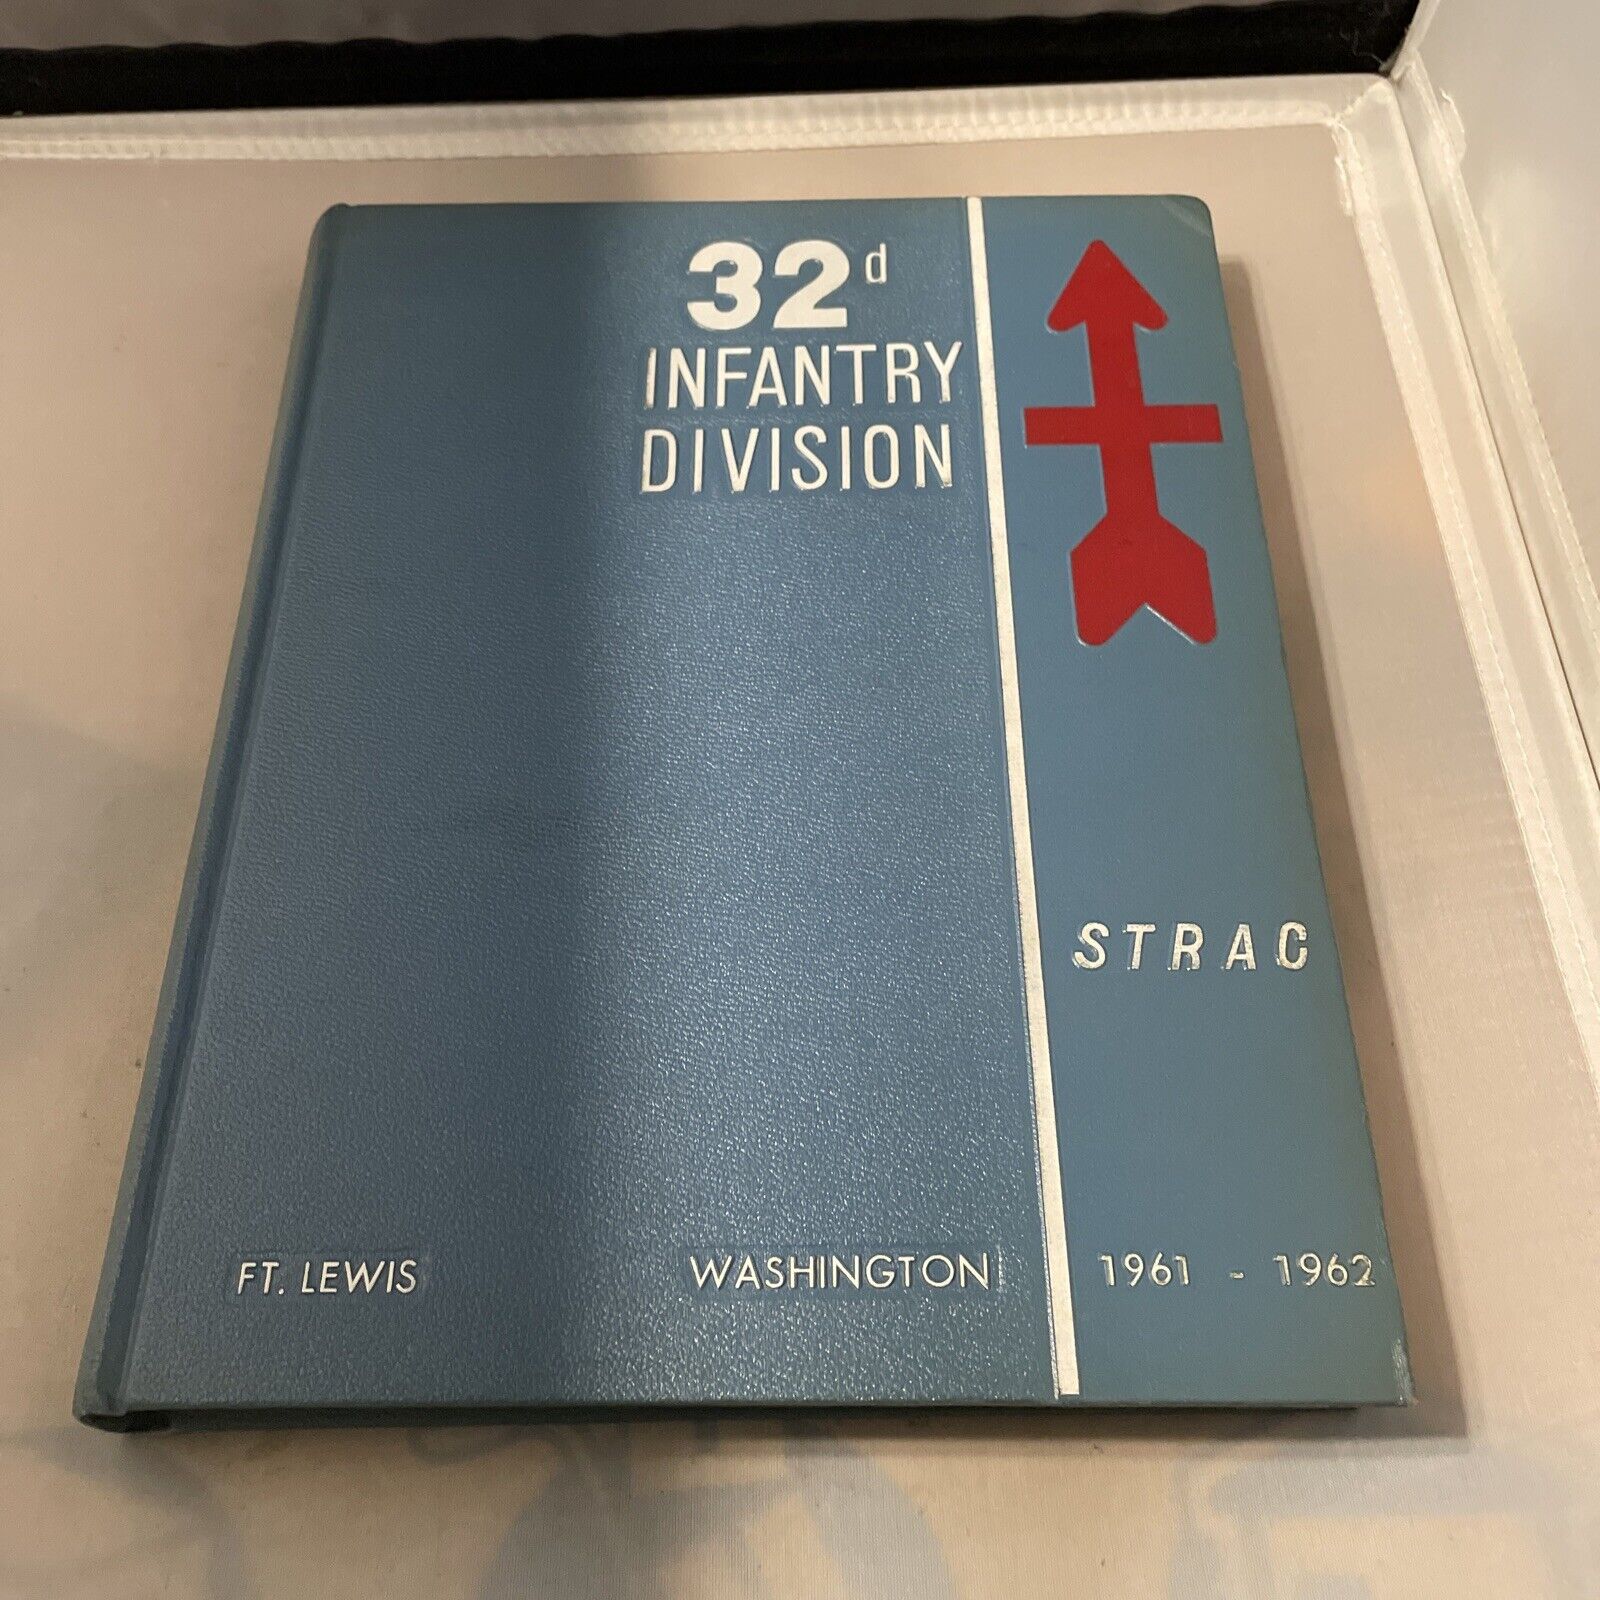 1961-62 US Army 32nd Infantry Division Yearbook Fort Lewis Washington STRAC